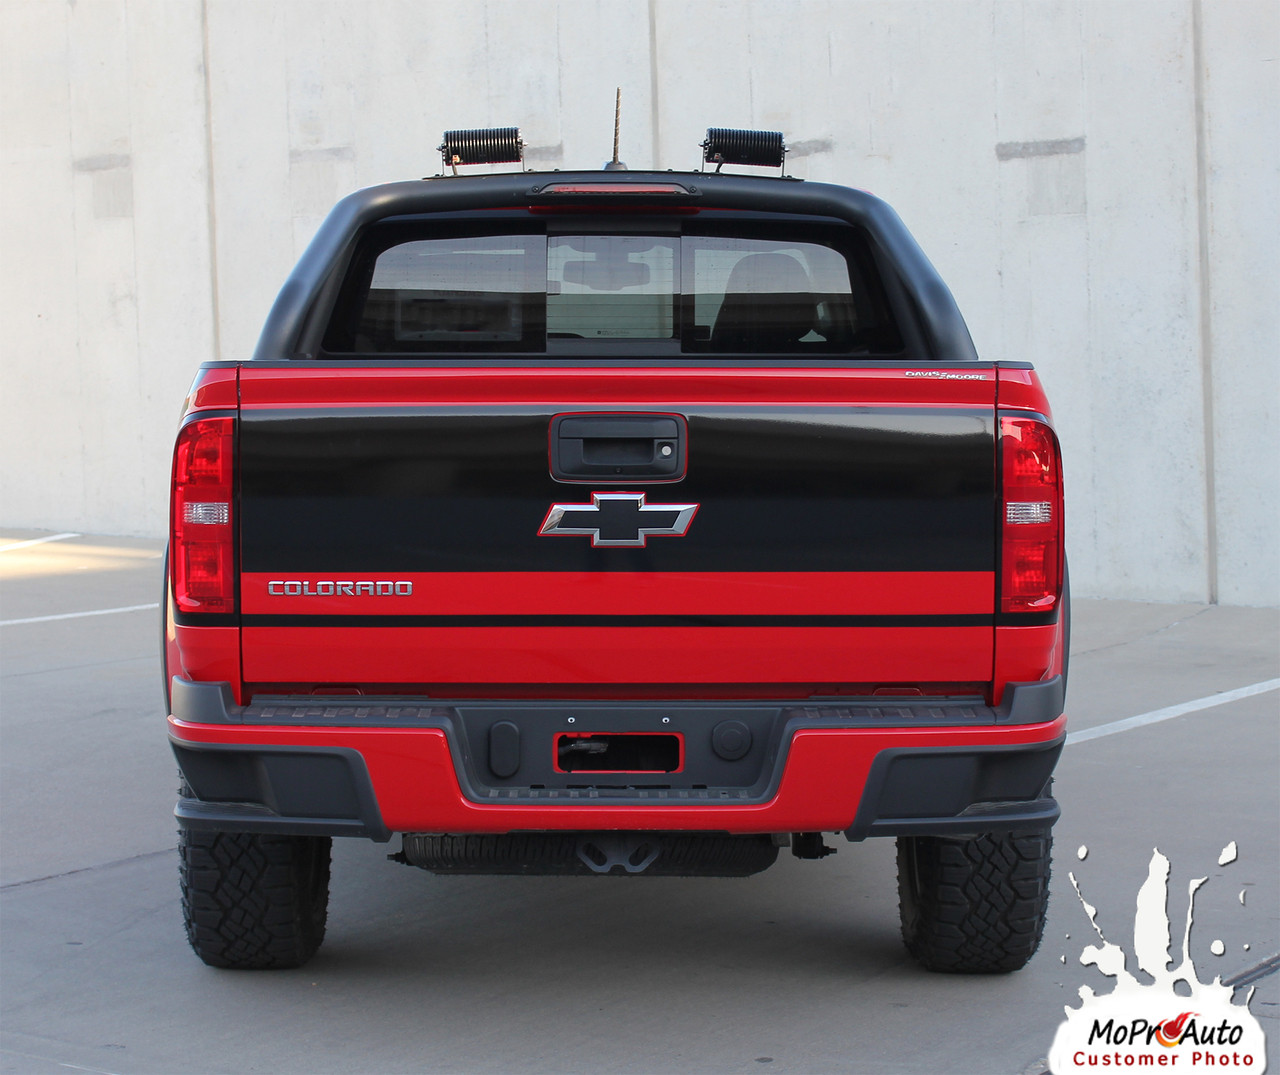 GRAND - Chevy Colorado Vinyl Graphics, Stripes and Decals Package by MoProAuto Pro Design Series